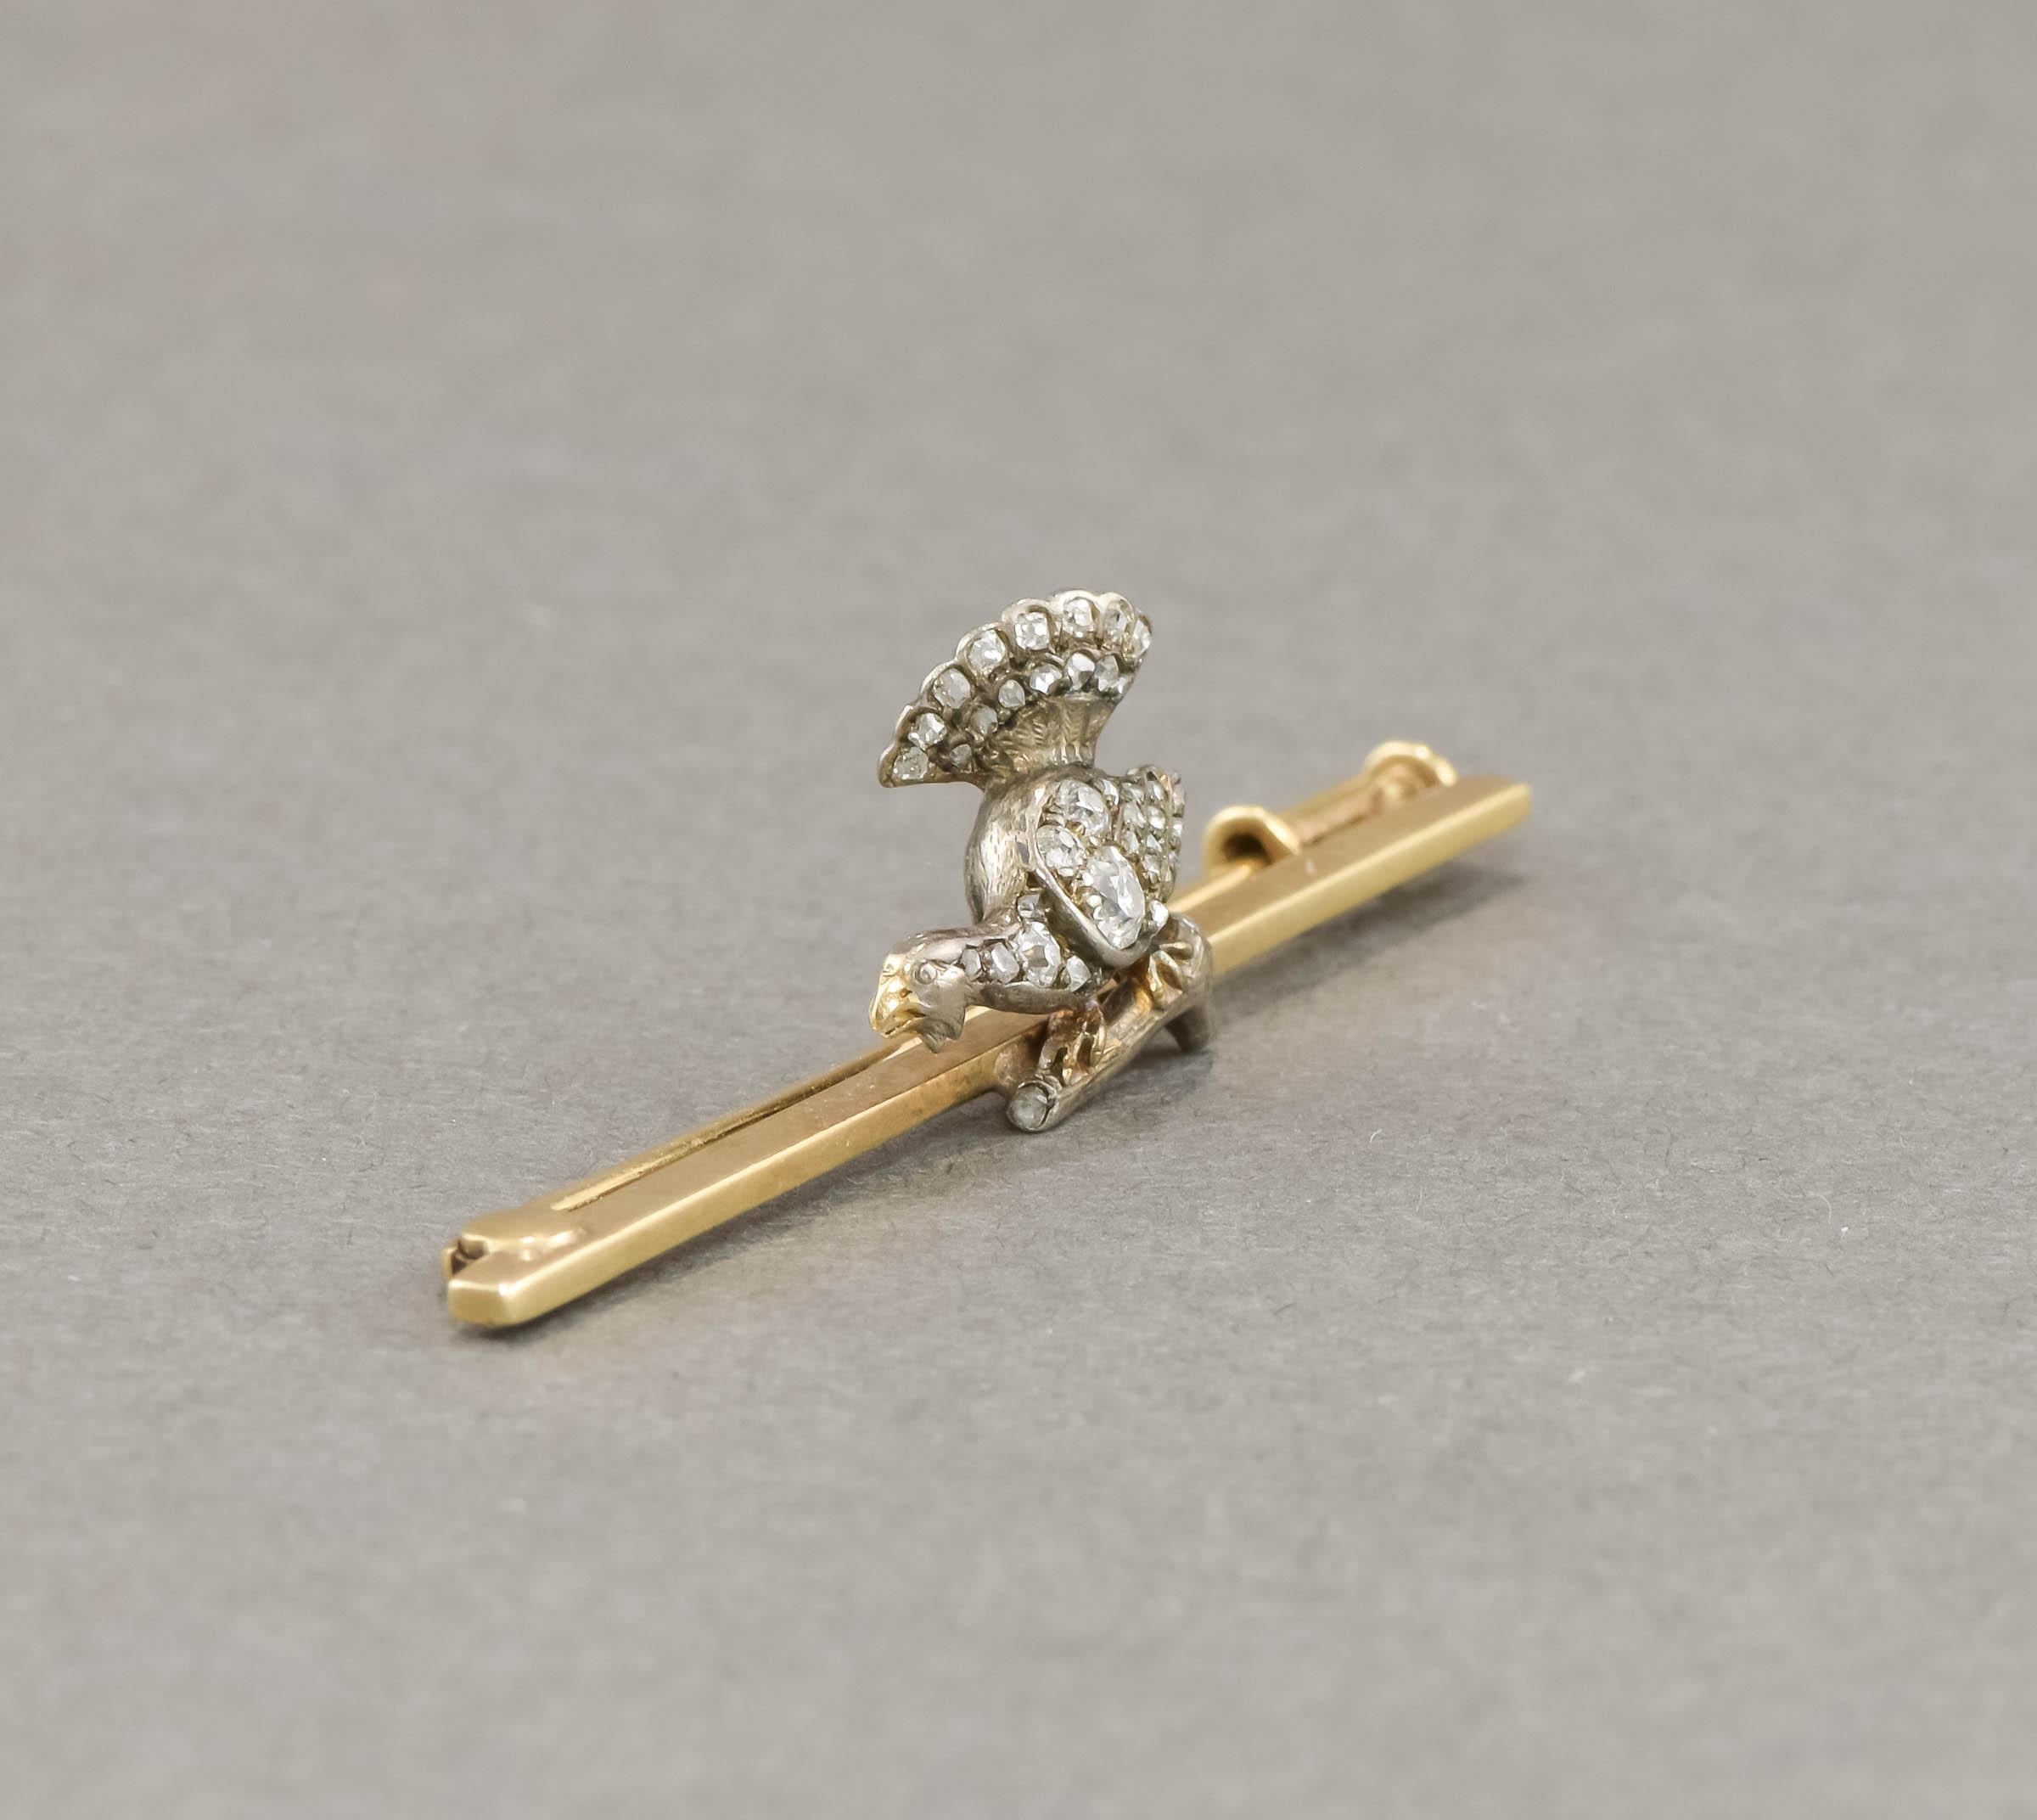 Antique Diamond Grouse Bird Capercaillie Brooch Pin in 14K Gold & Silver In Good Condition For Sale In Danvers, MA